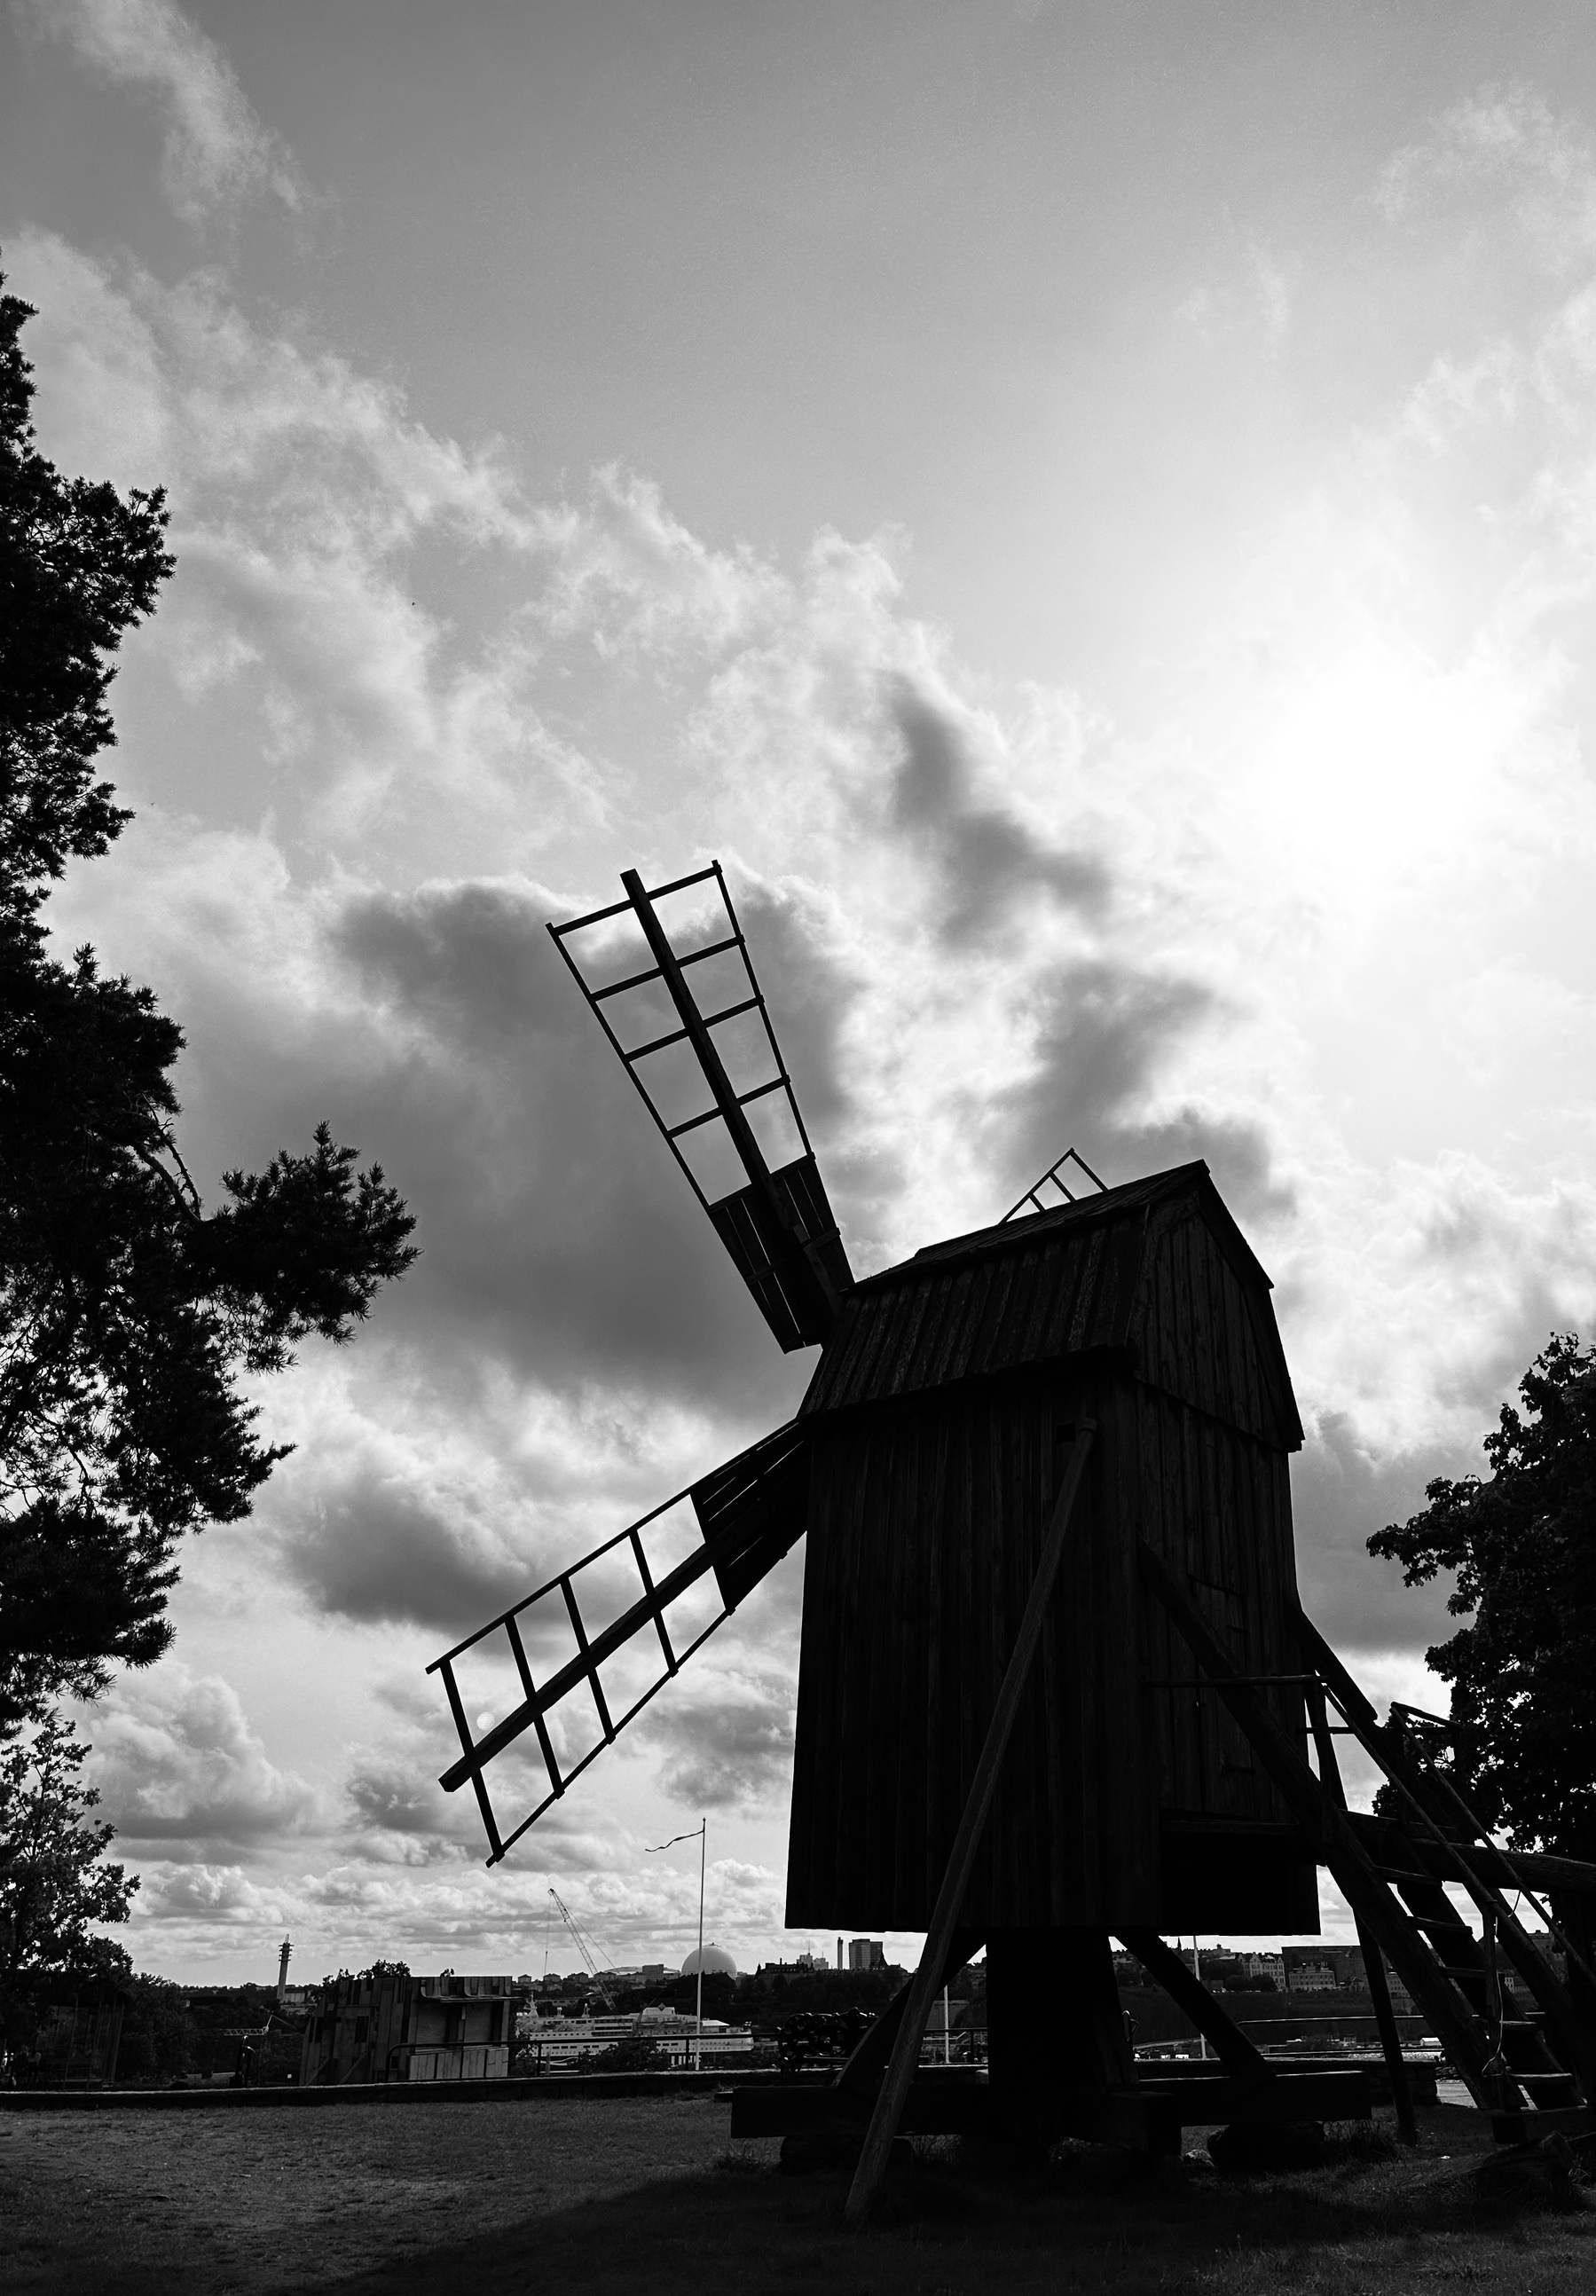 A windmill in silhouette against a cloudy sky, with trees to the left and right.